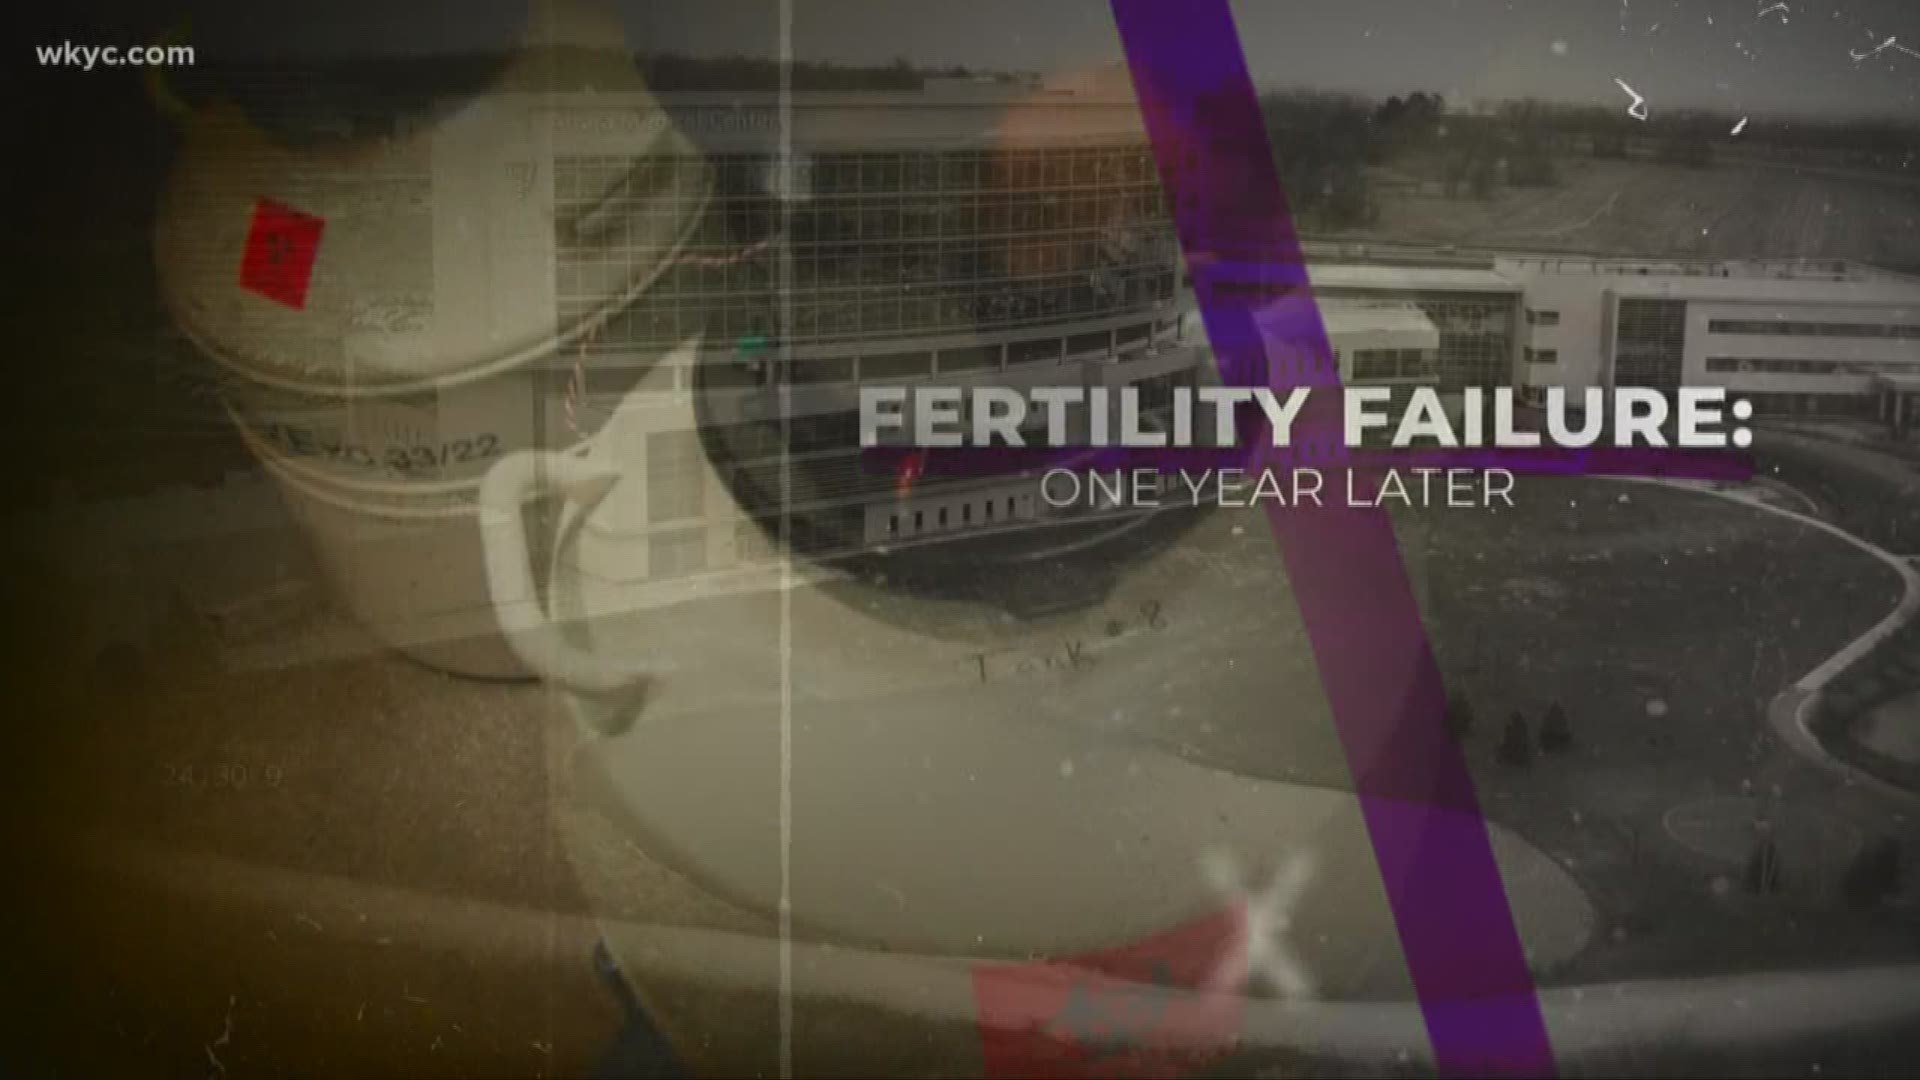 UH Fertility Failure: Former Judge weighs in on case